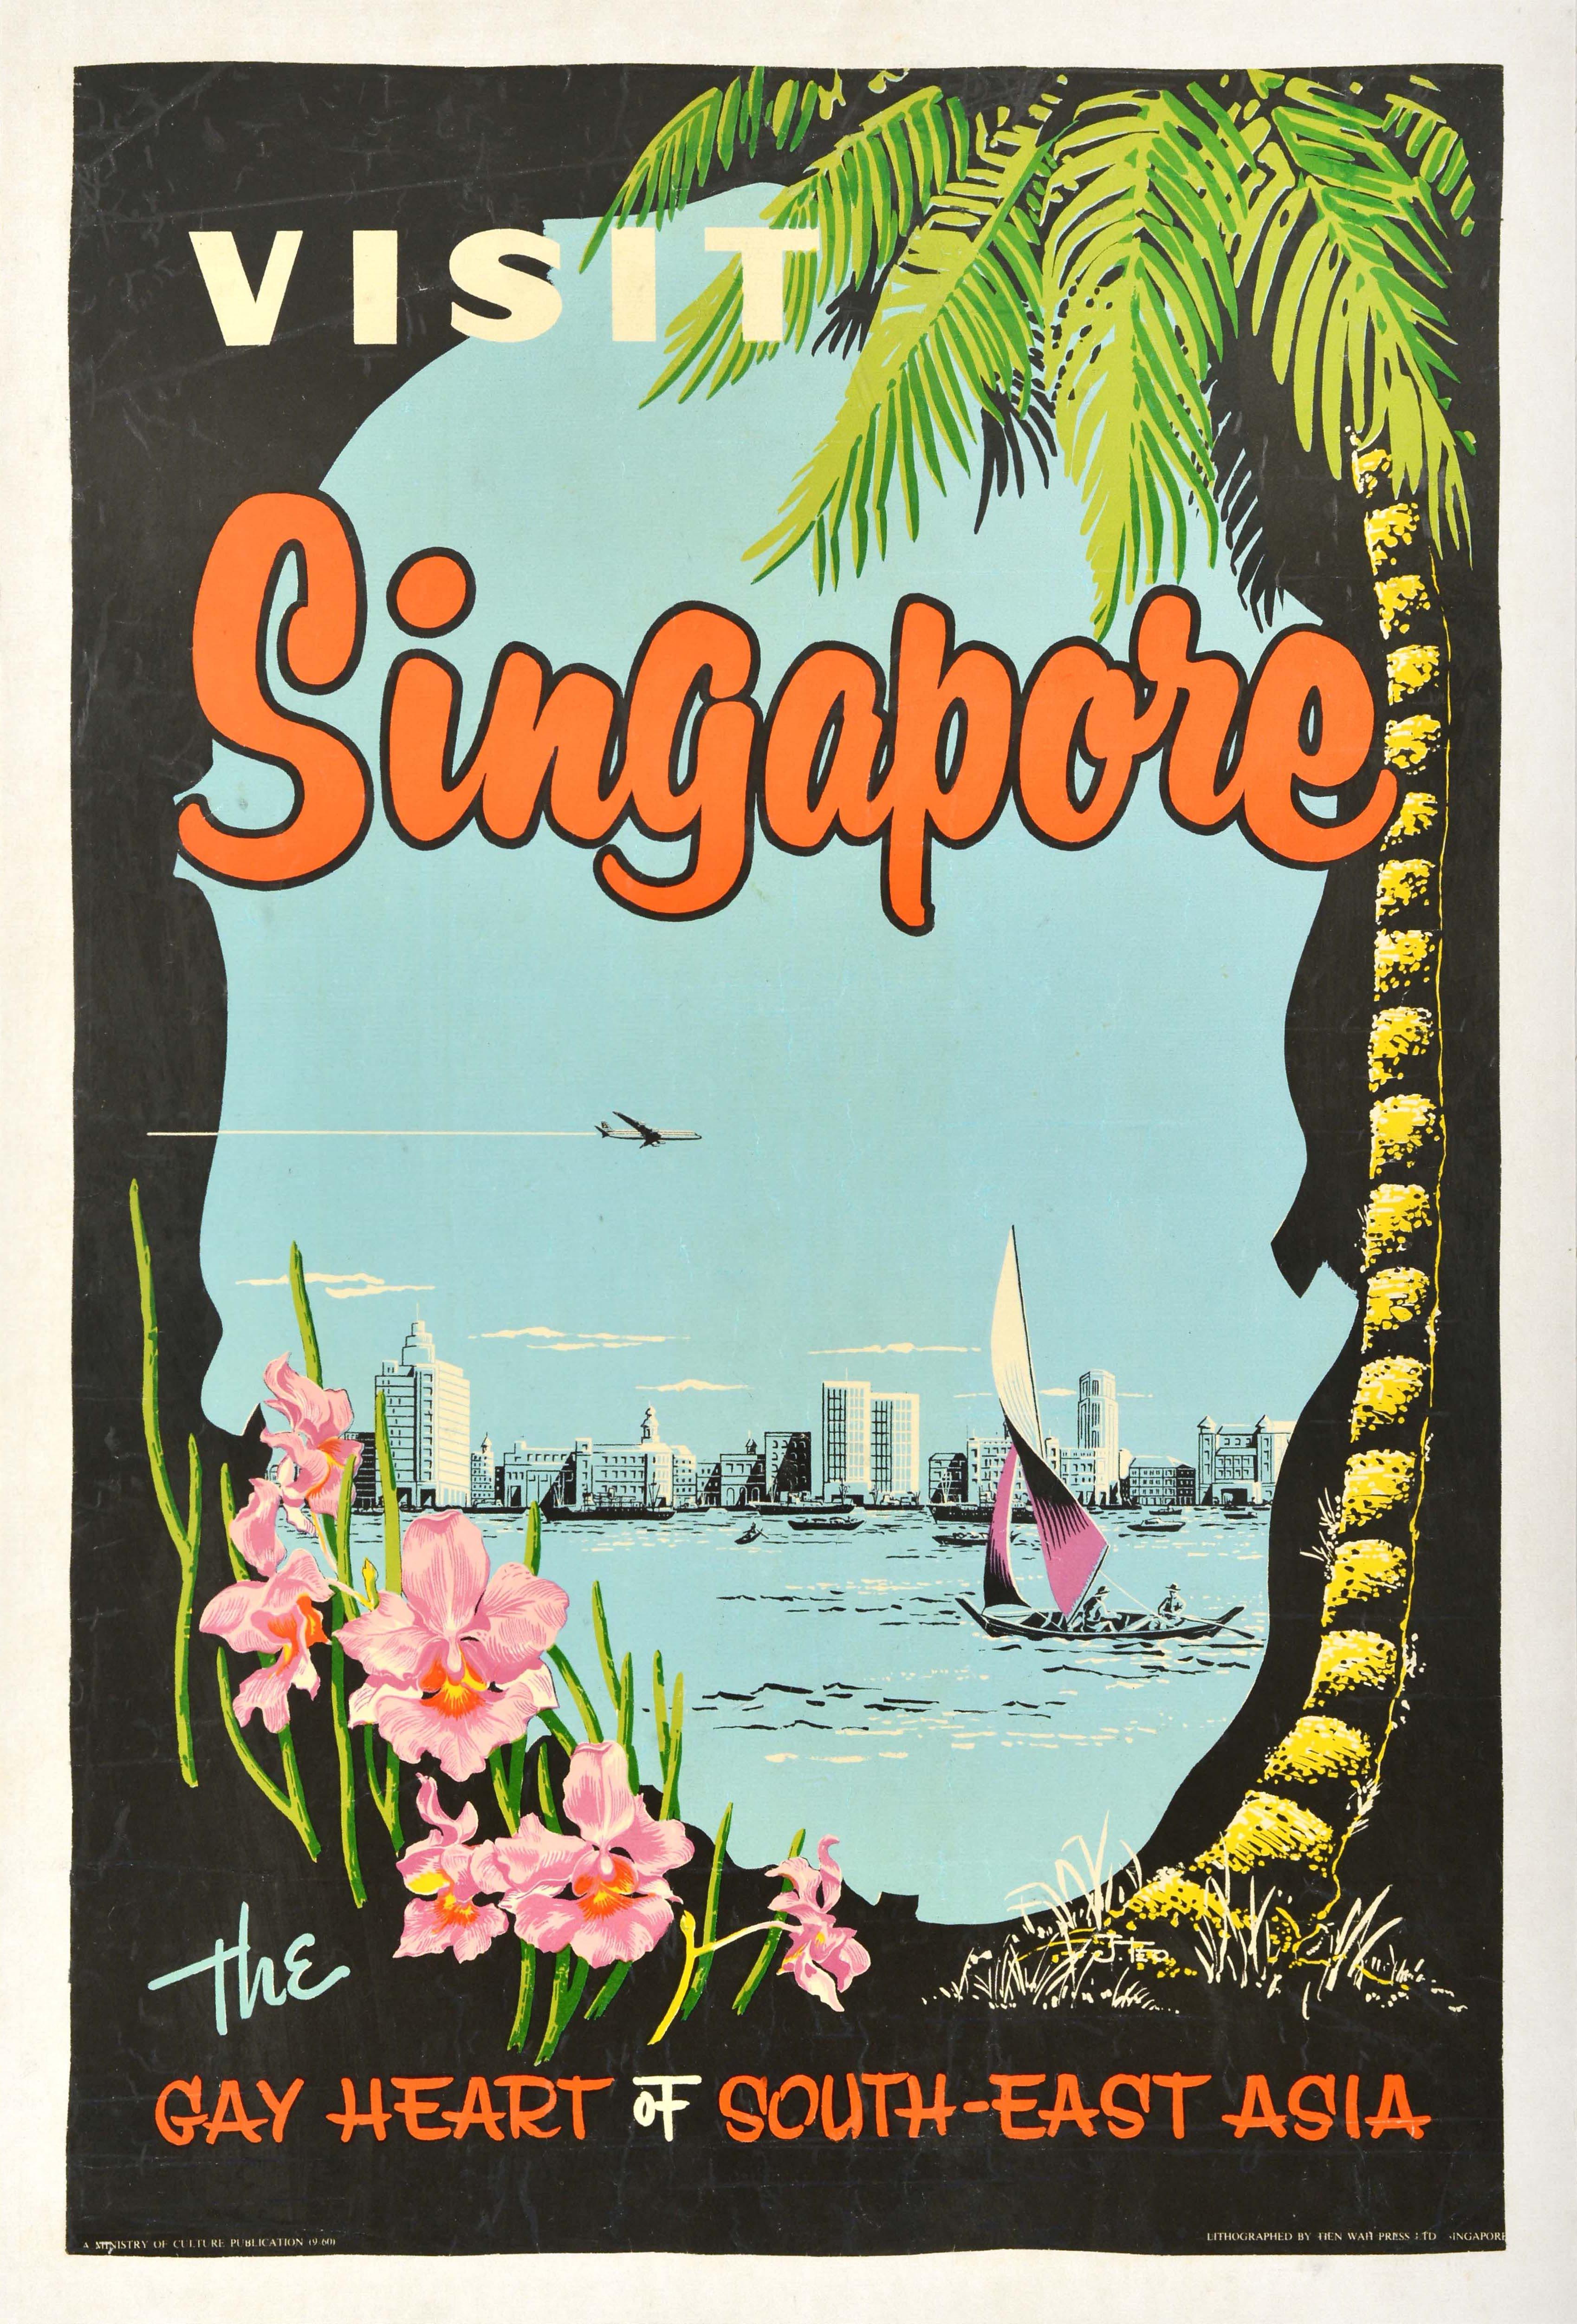 Unknown Print - Original Vintage Travel Poster Singapore Gay Heart Of South East Asia Orchid Art